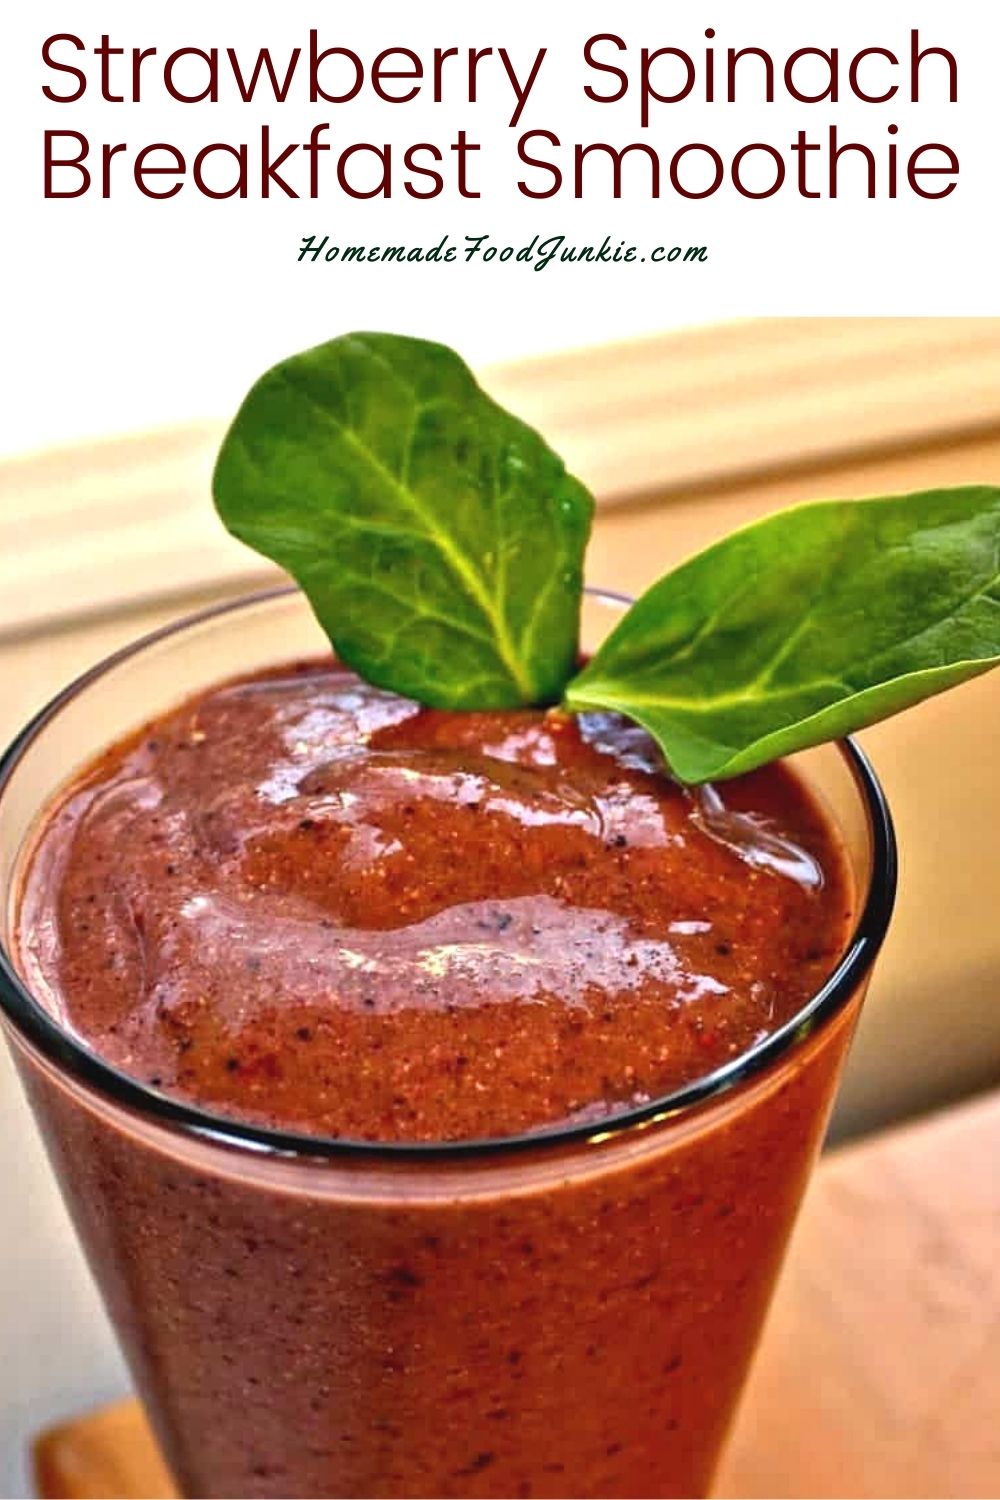 Strawberry Spinach Breakfast Smoothie-Pin Image